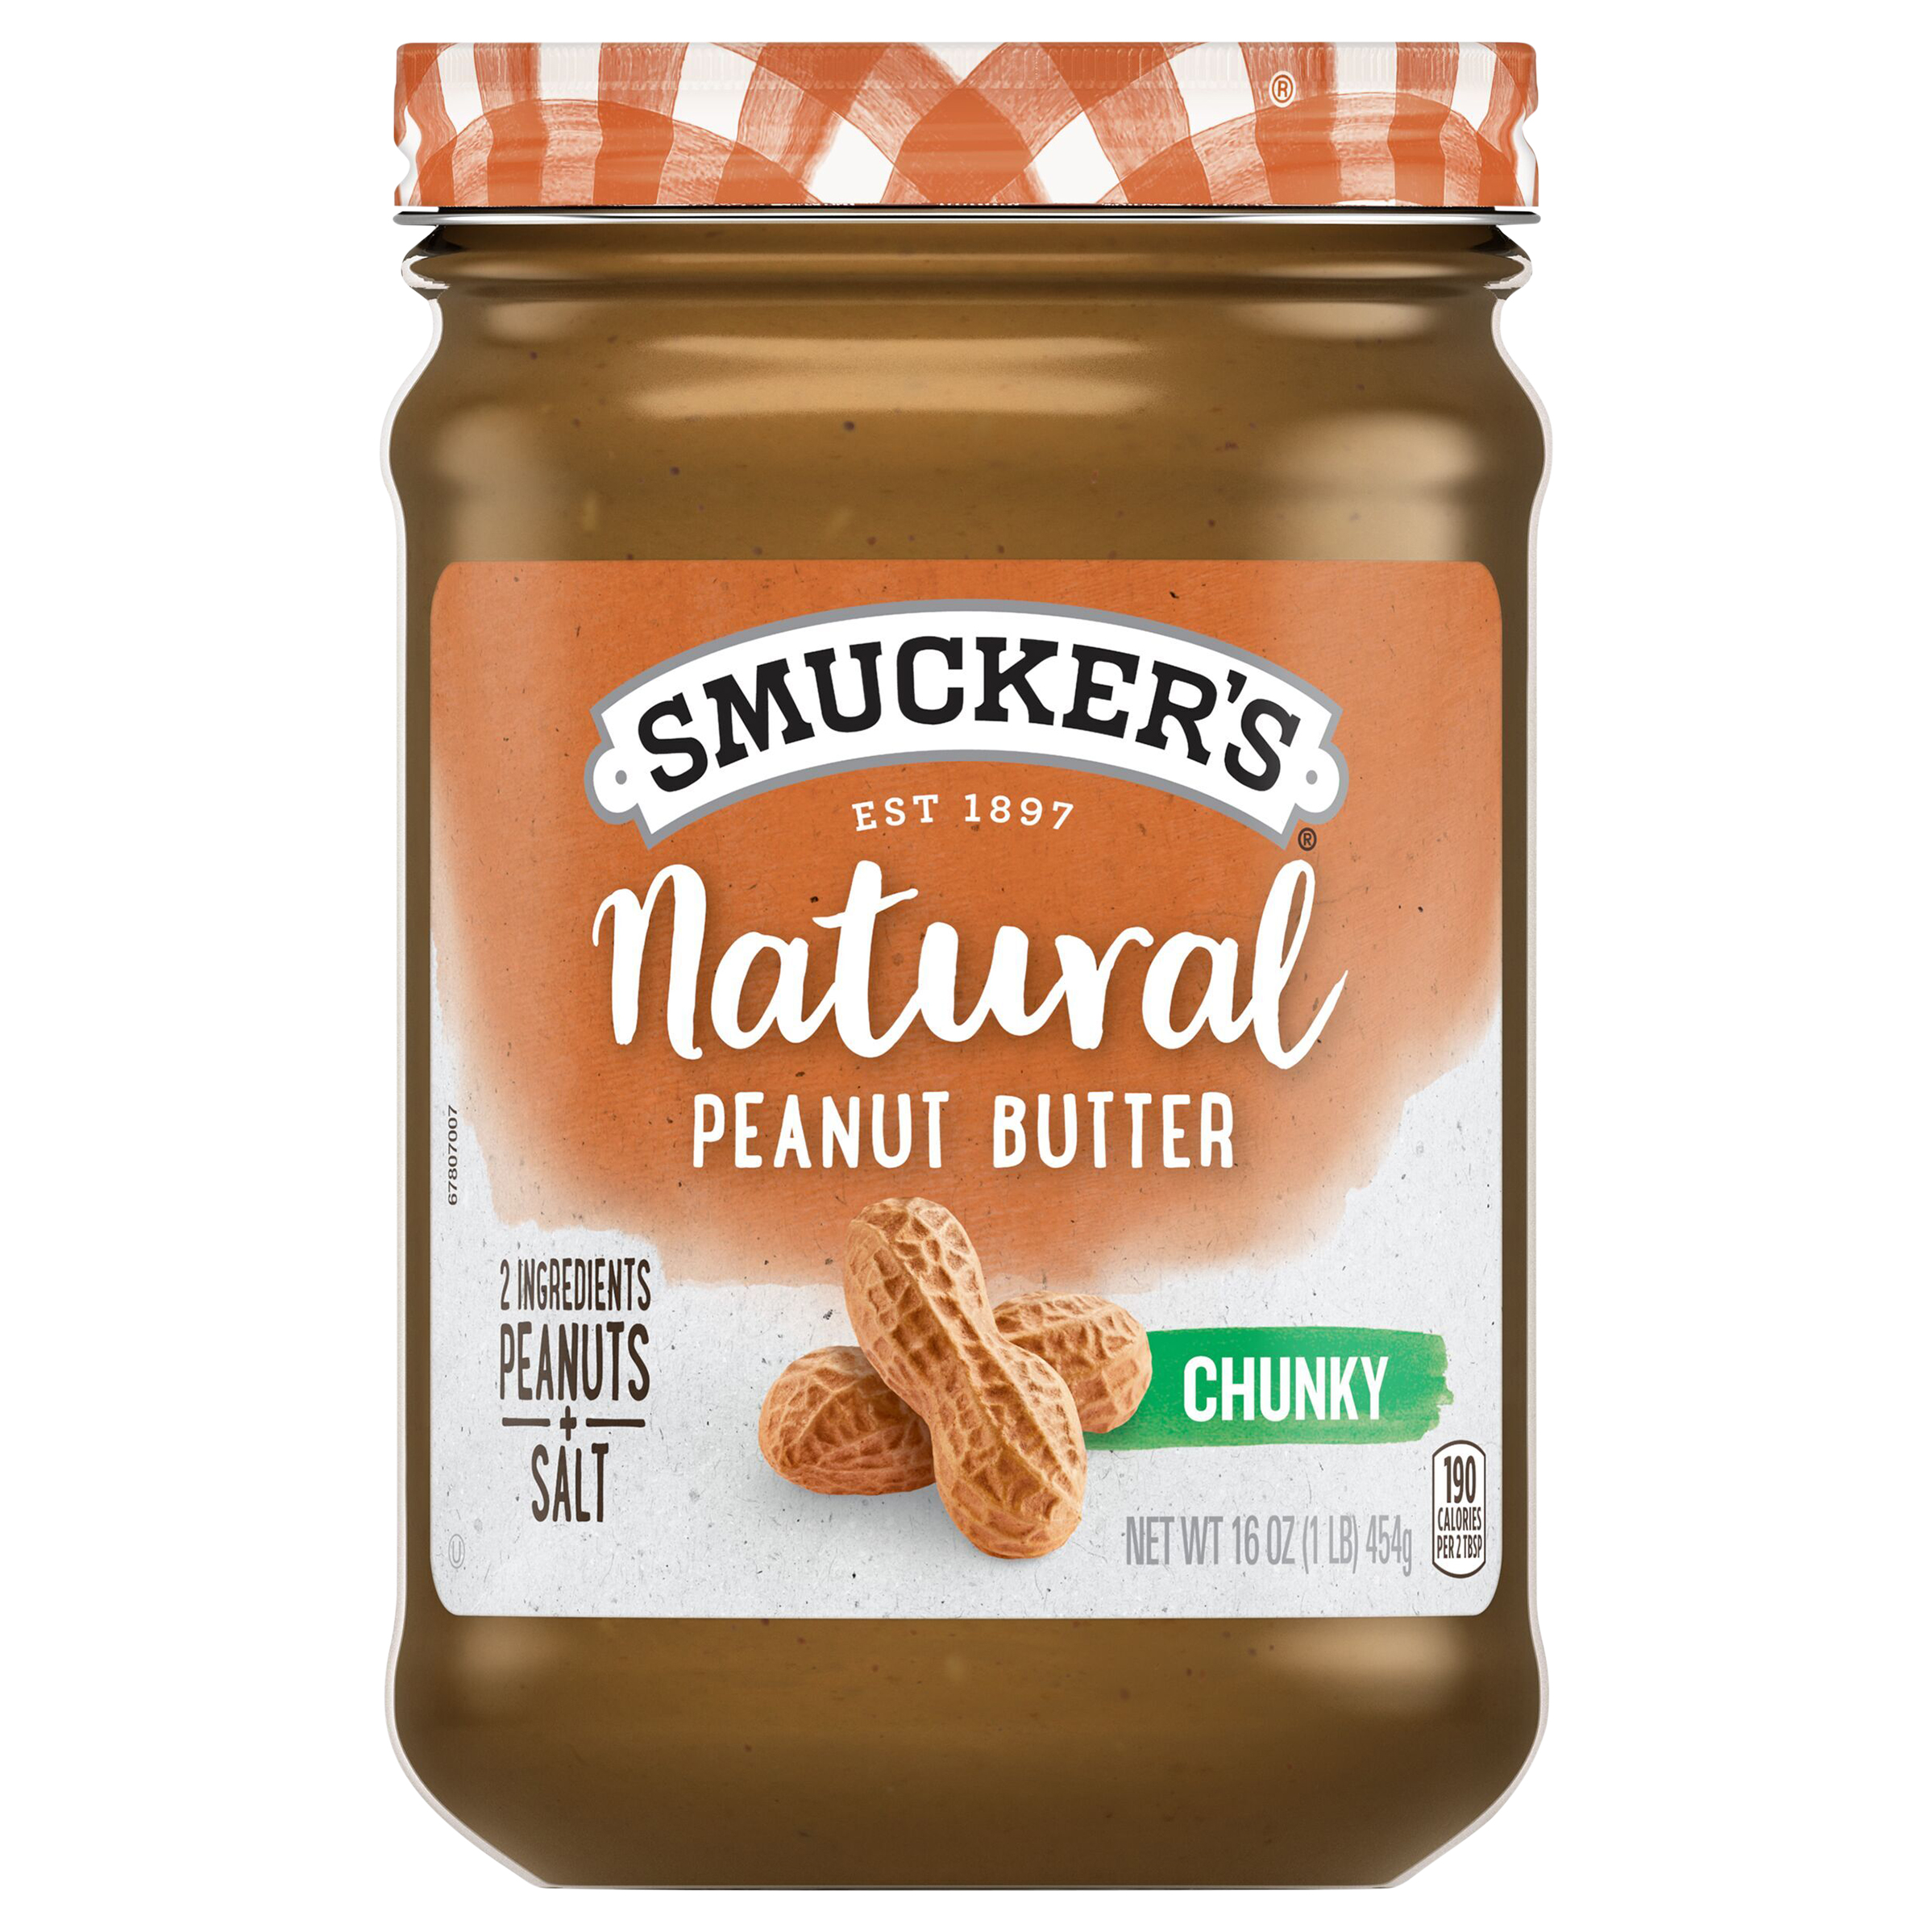 Peanut Butter, Natural, Chunky